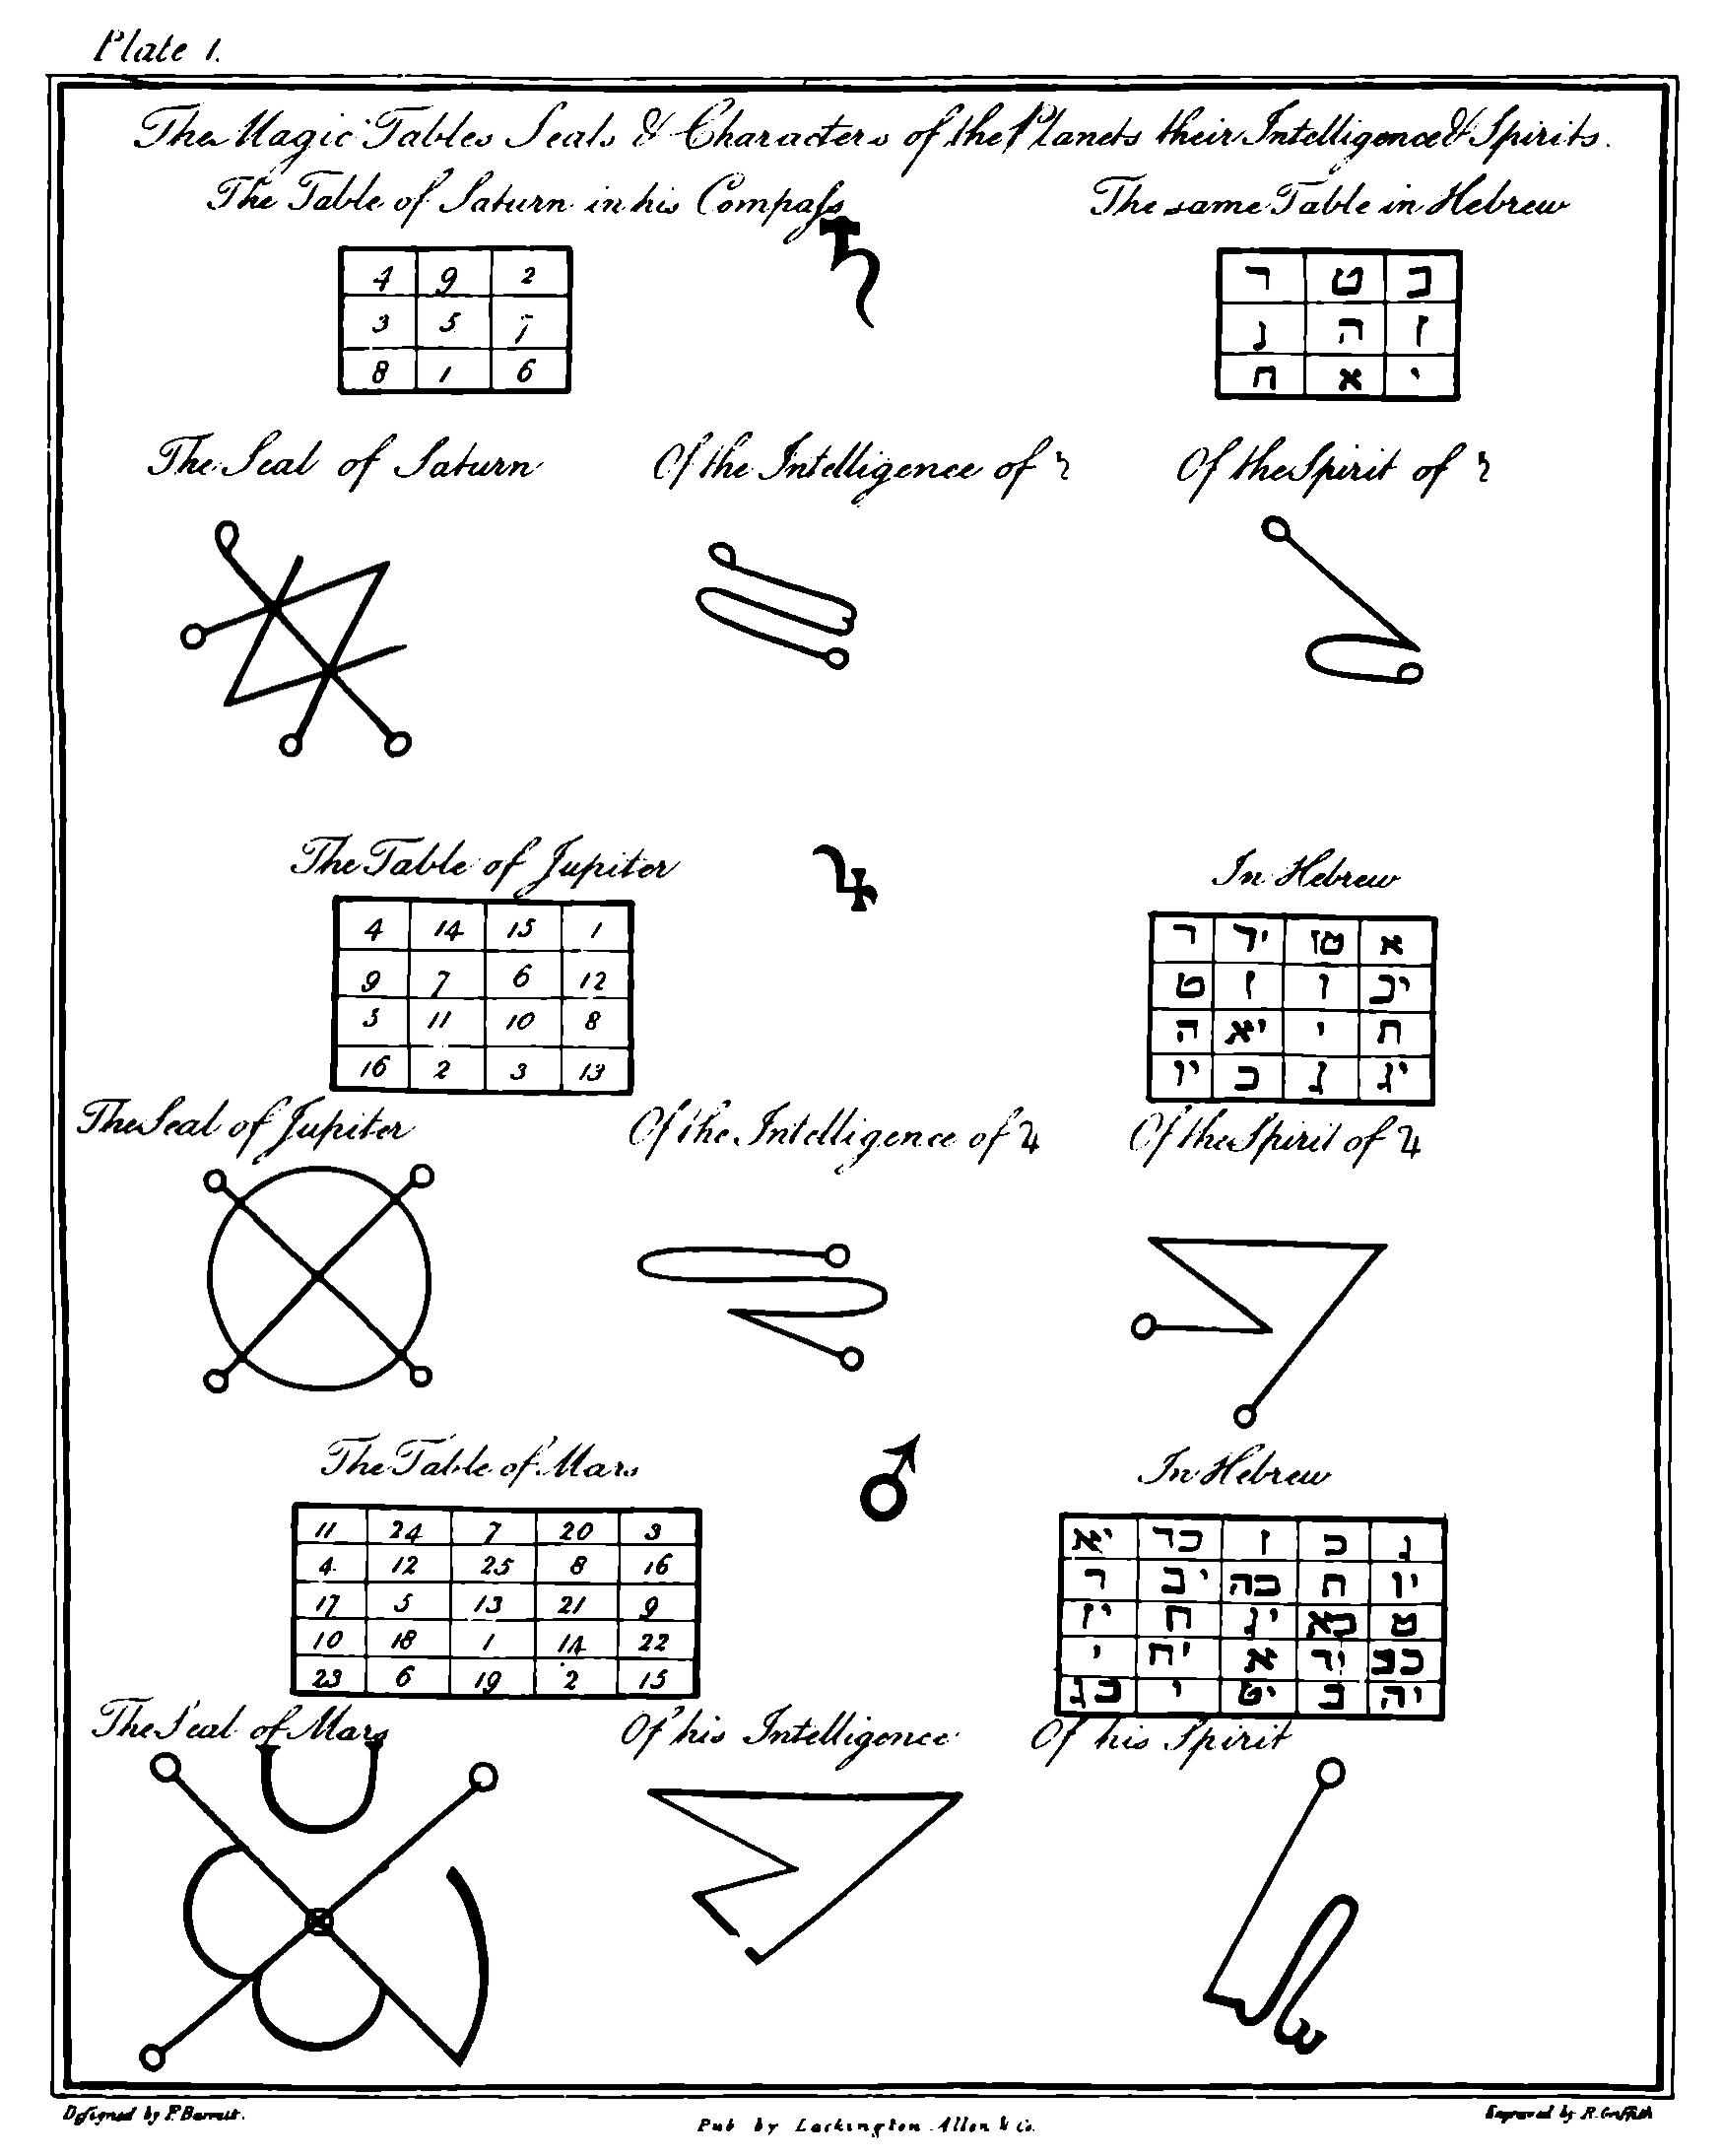 https://upload.wikimedia.org/wikipedia/commons/c/cd/Barrett_Magus_Plate_1_-_Magic_Squares.png